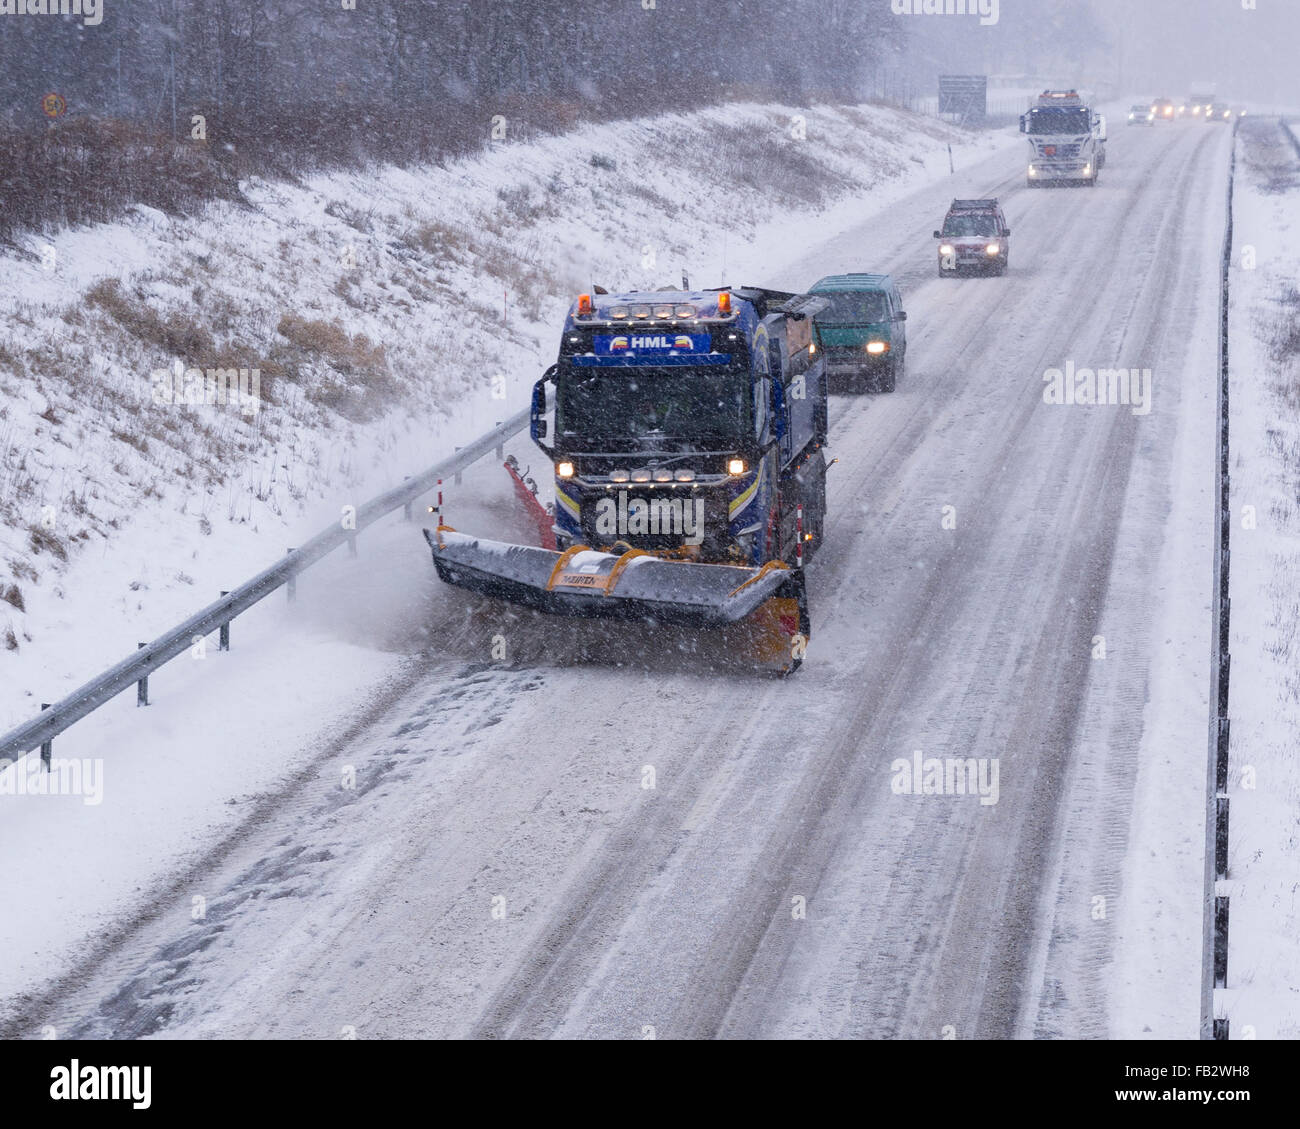 Sweden Weather: E20, Floda, Sweden, 8th Feb 2016. First major snowfall of the year causes traffic accidents and widespread travel disruptions. Snowplows and gritters are deployed to keep E20 motorway open.  Model Release: No.  Property Release: No. Stock Photo